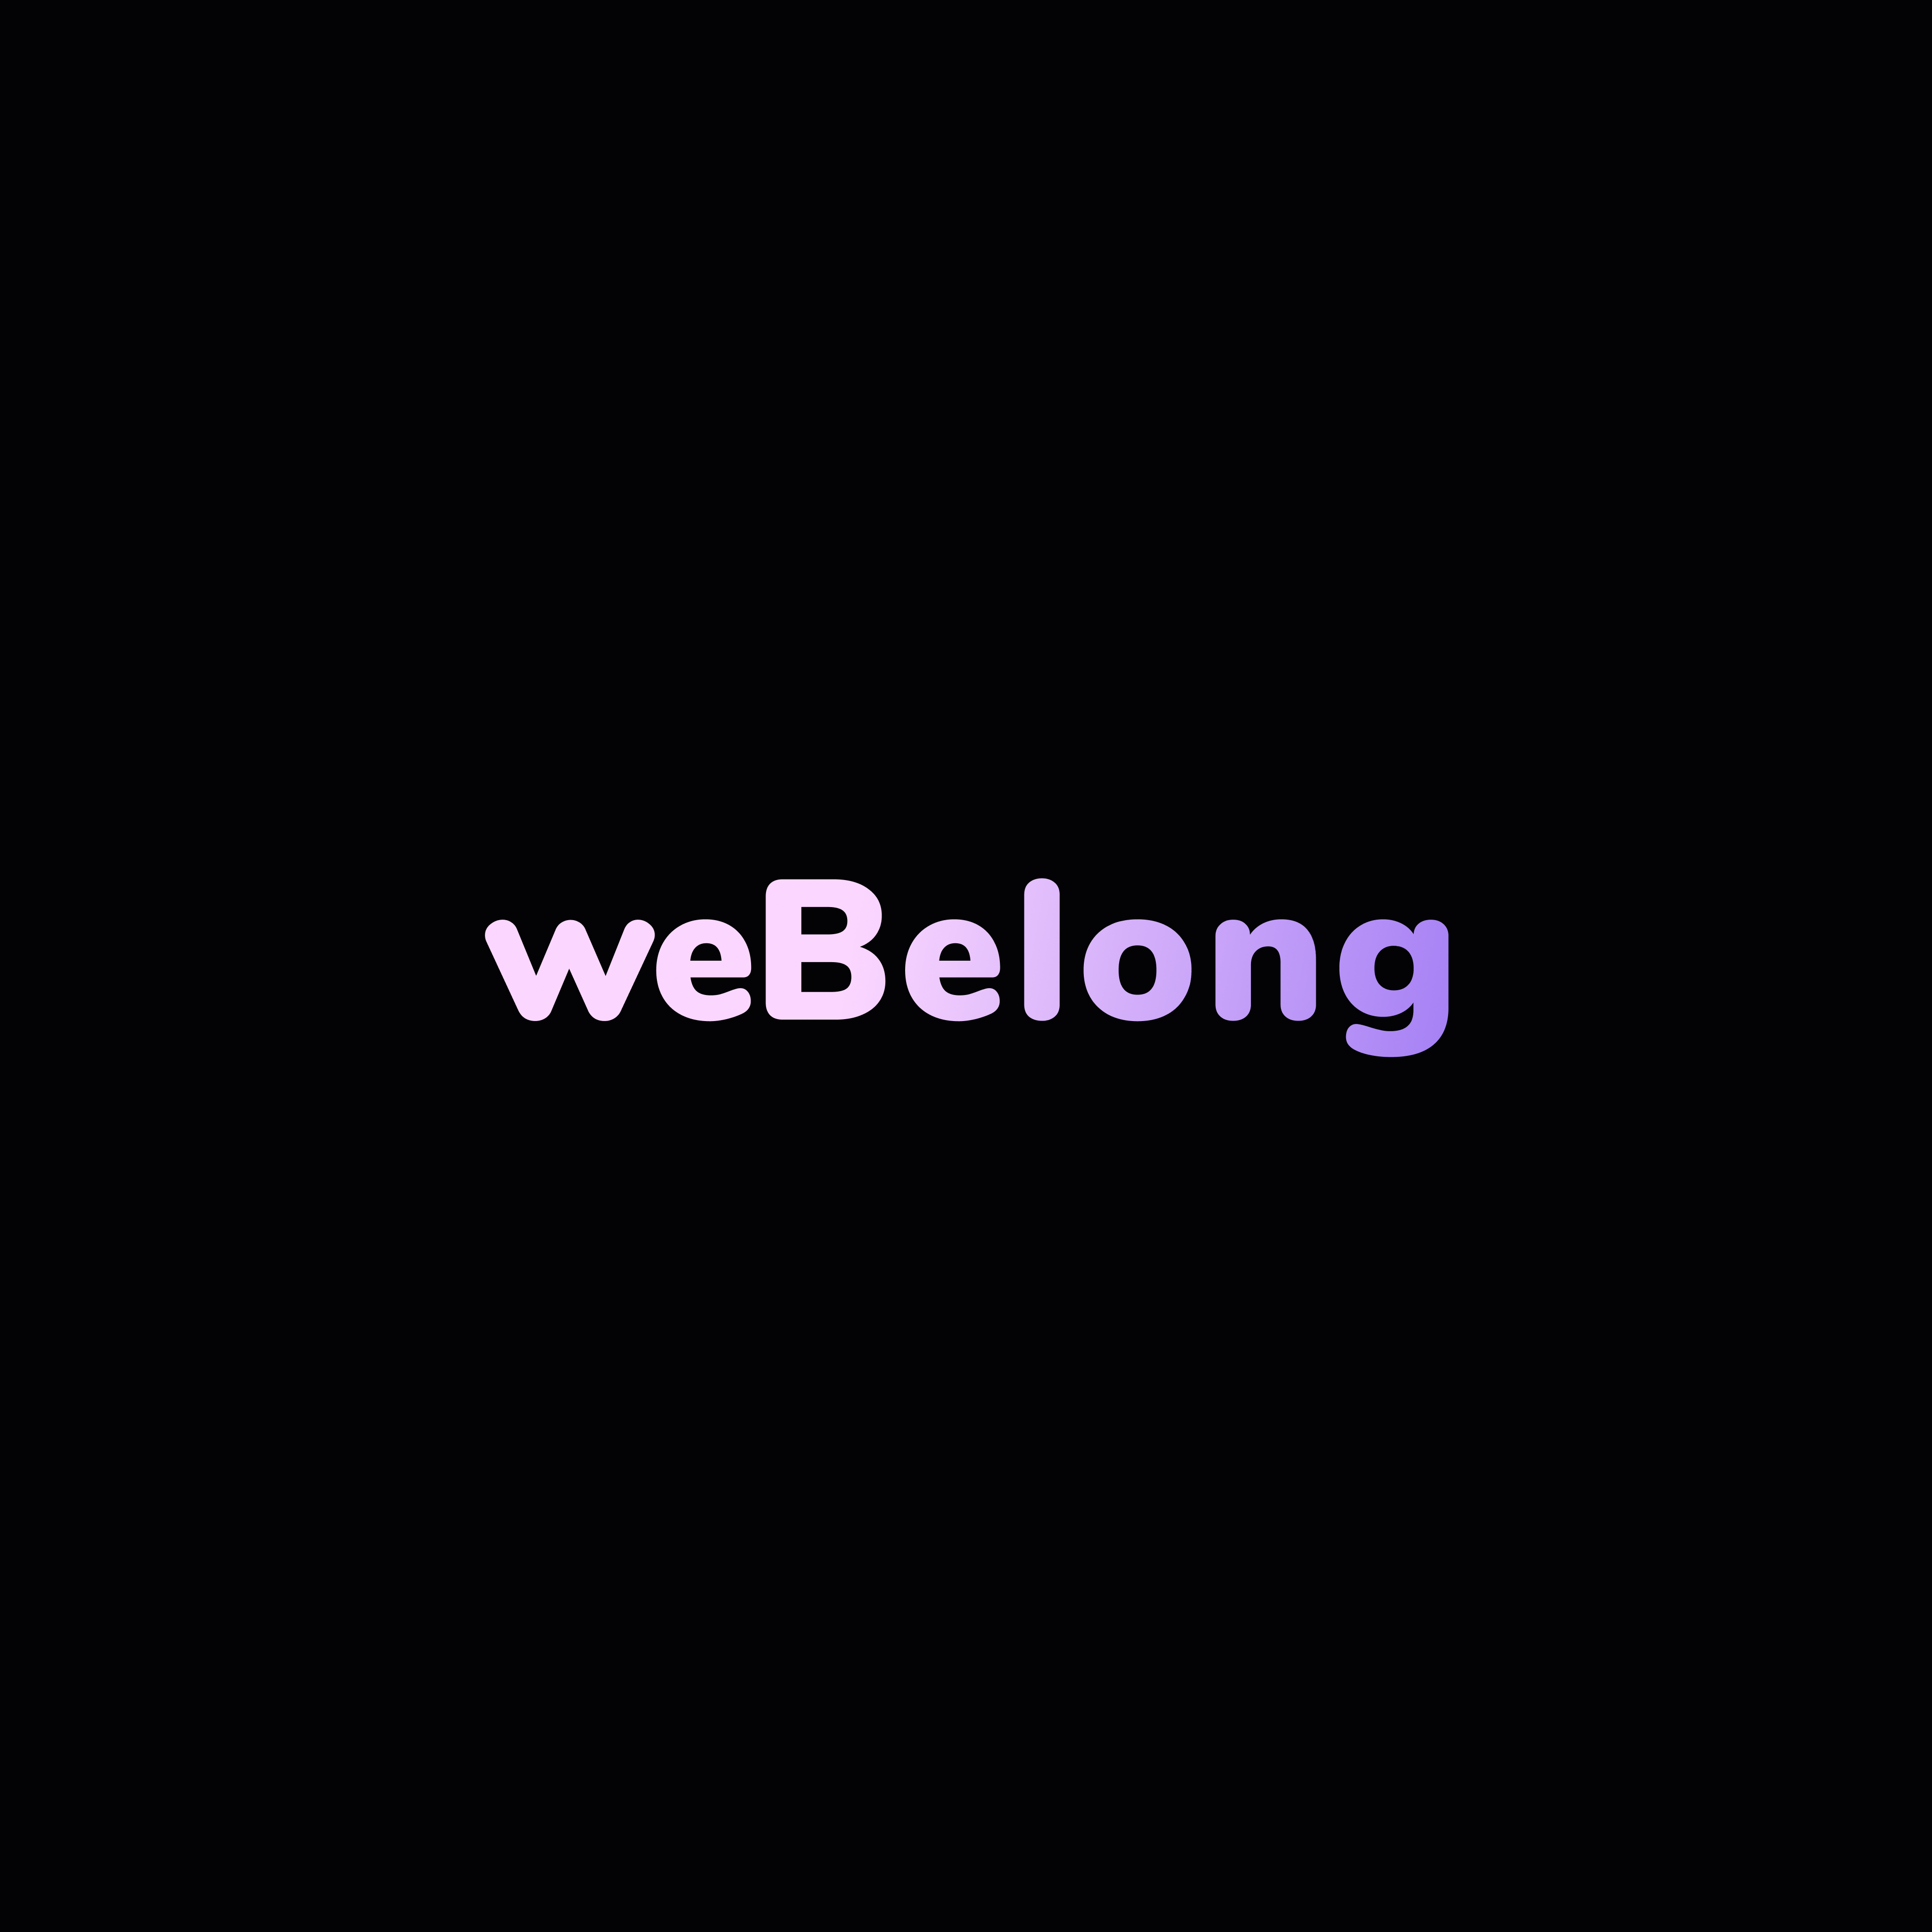 weBelong: The network reinventing social media by taking out toxicity and creating a safe online space for marginalized young people